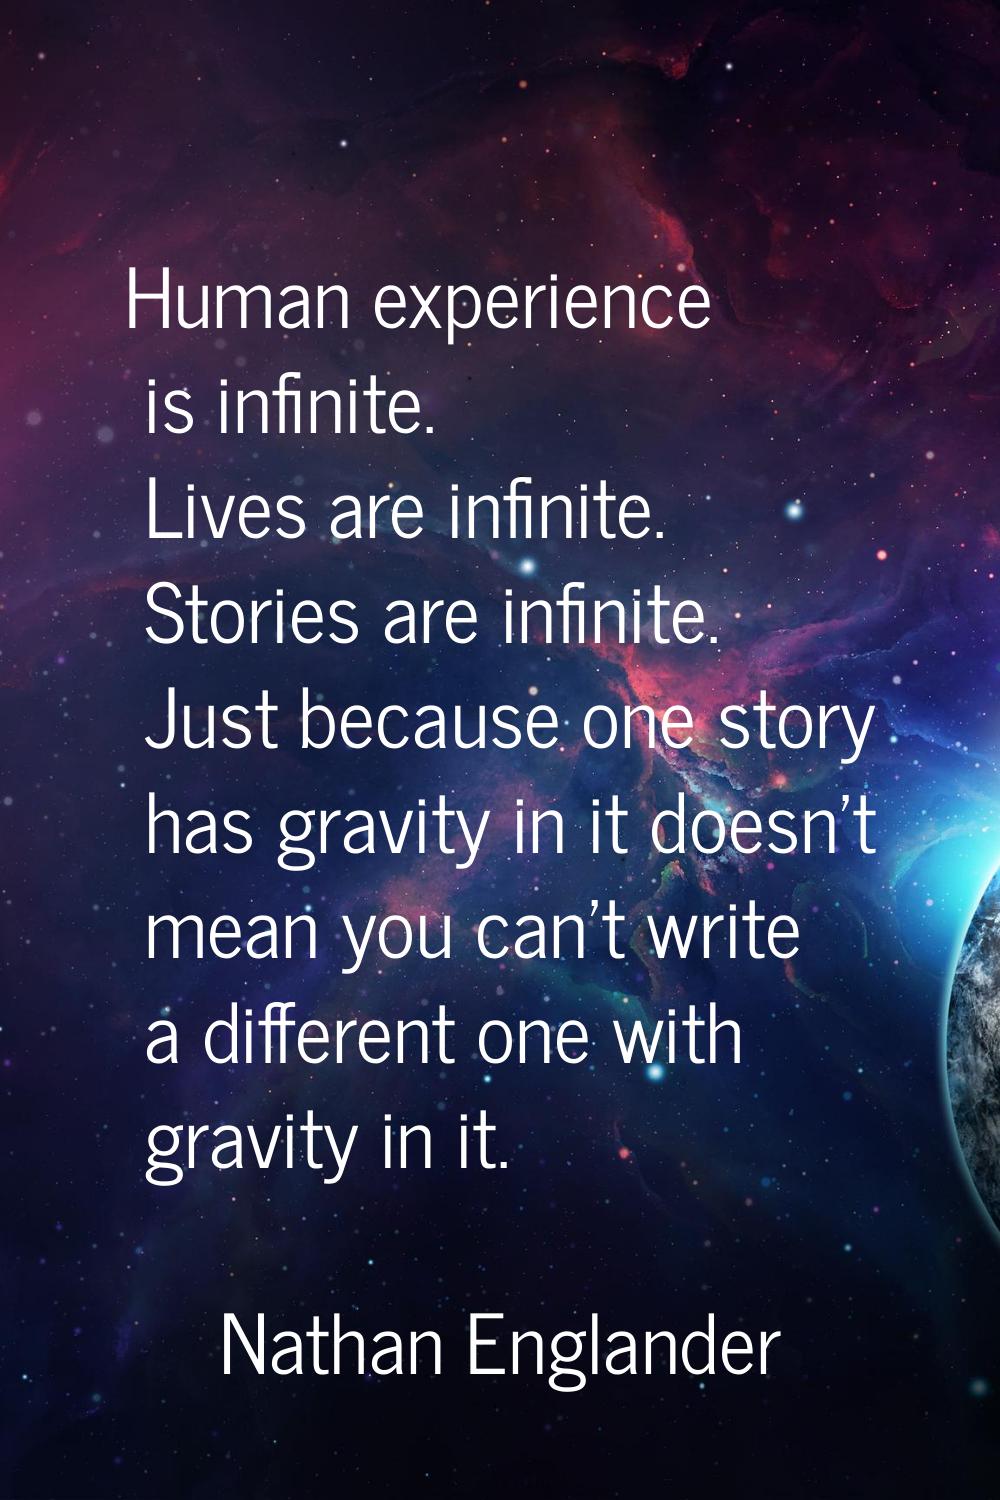 Human experience is infinite. Lives are infinite. Stories are infinite. Just because one story has 